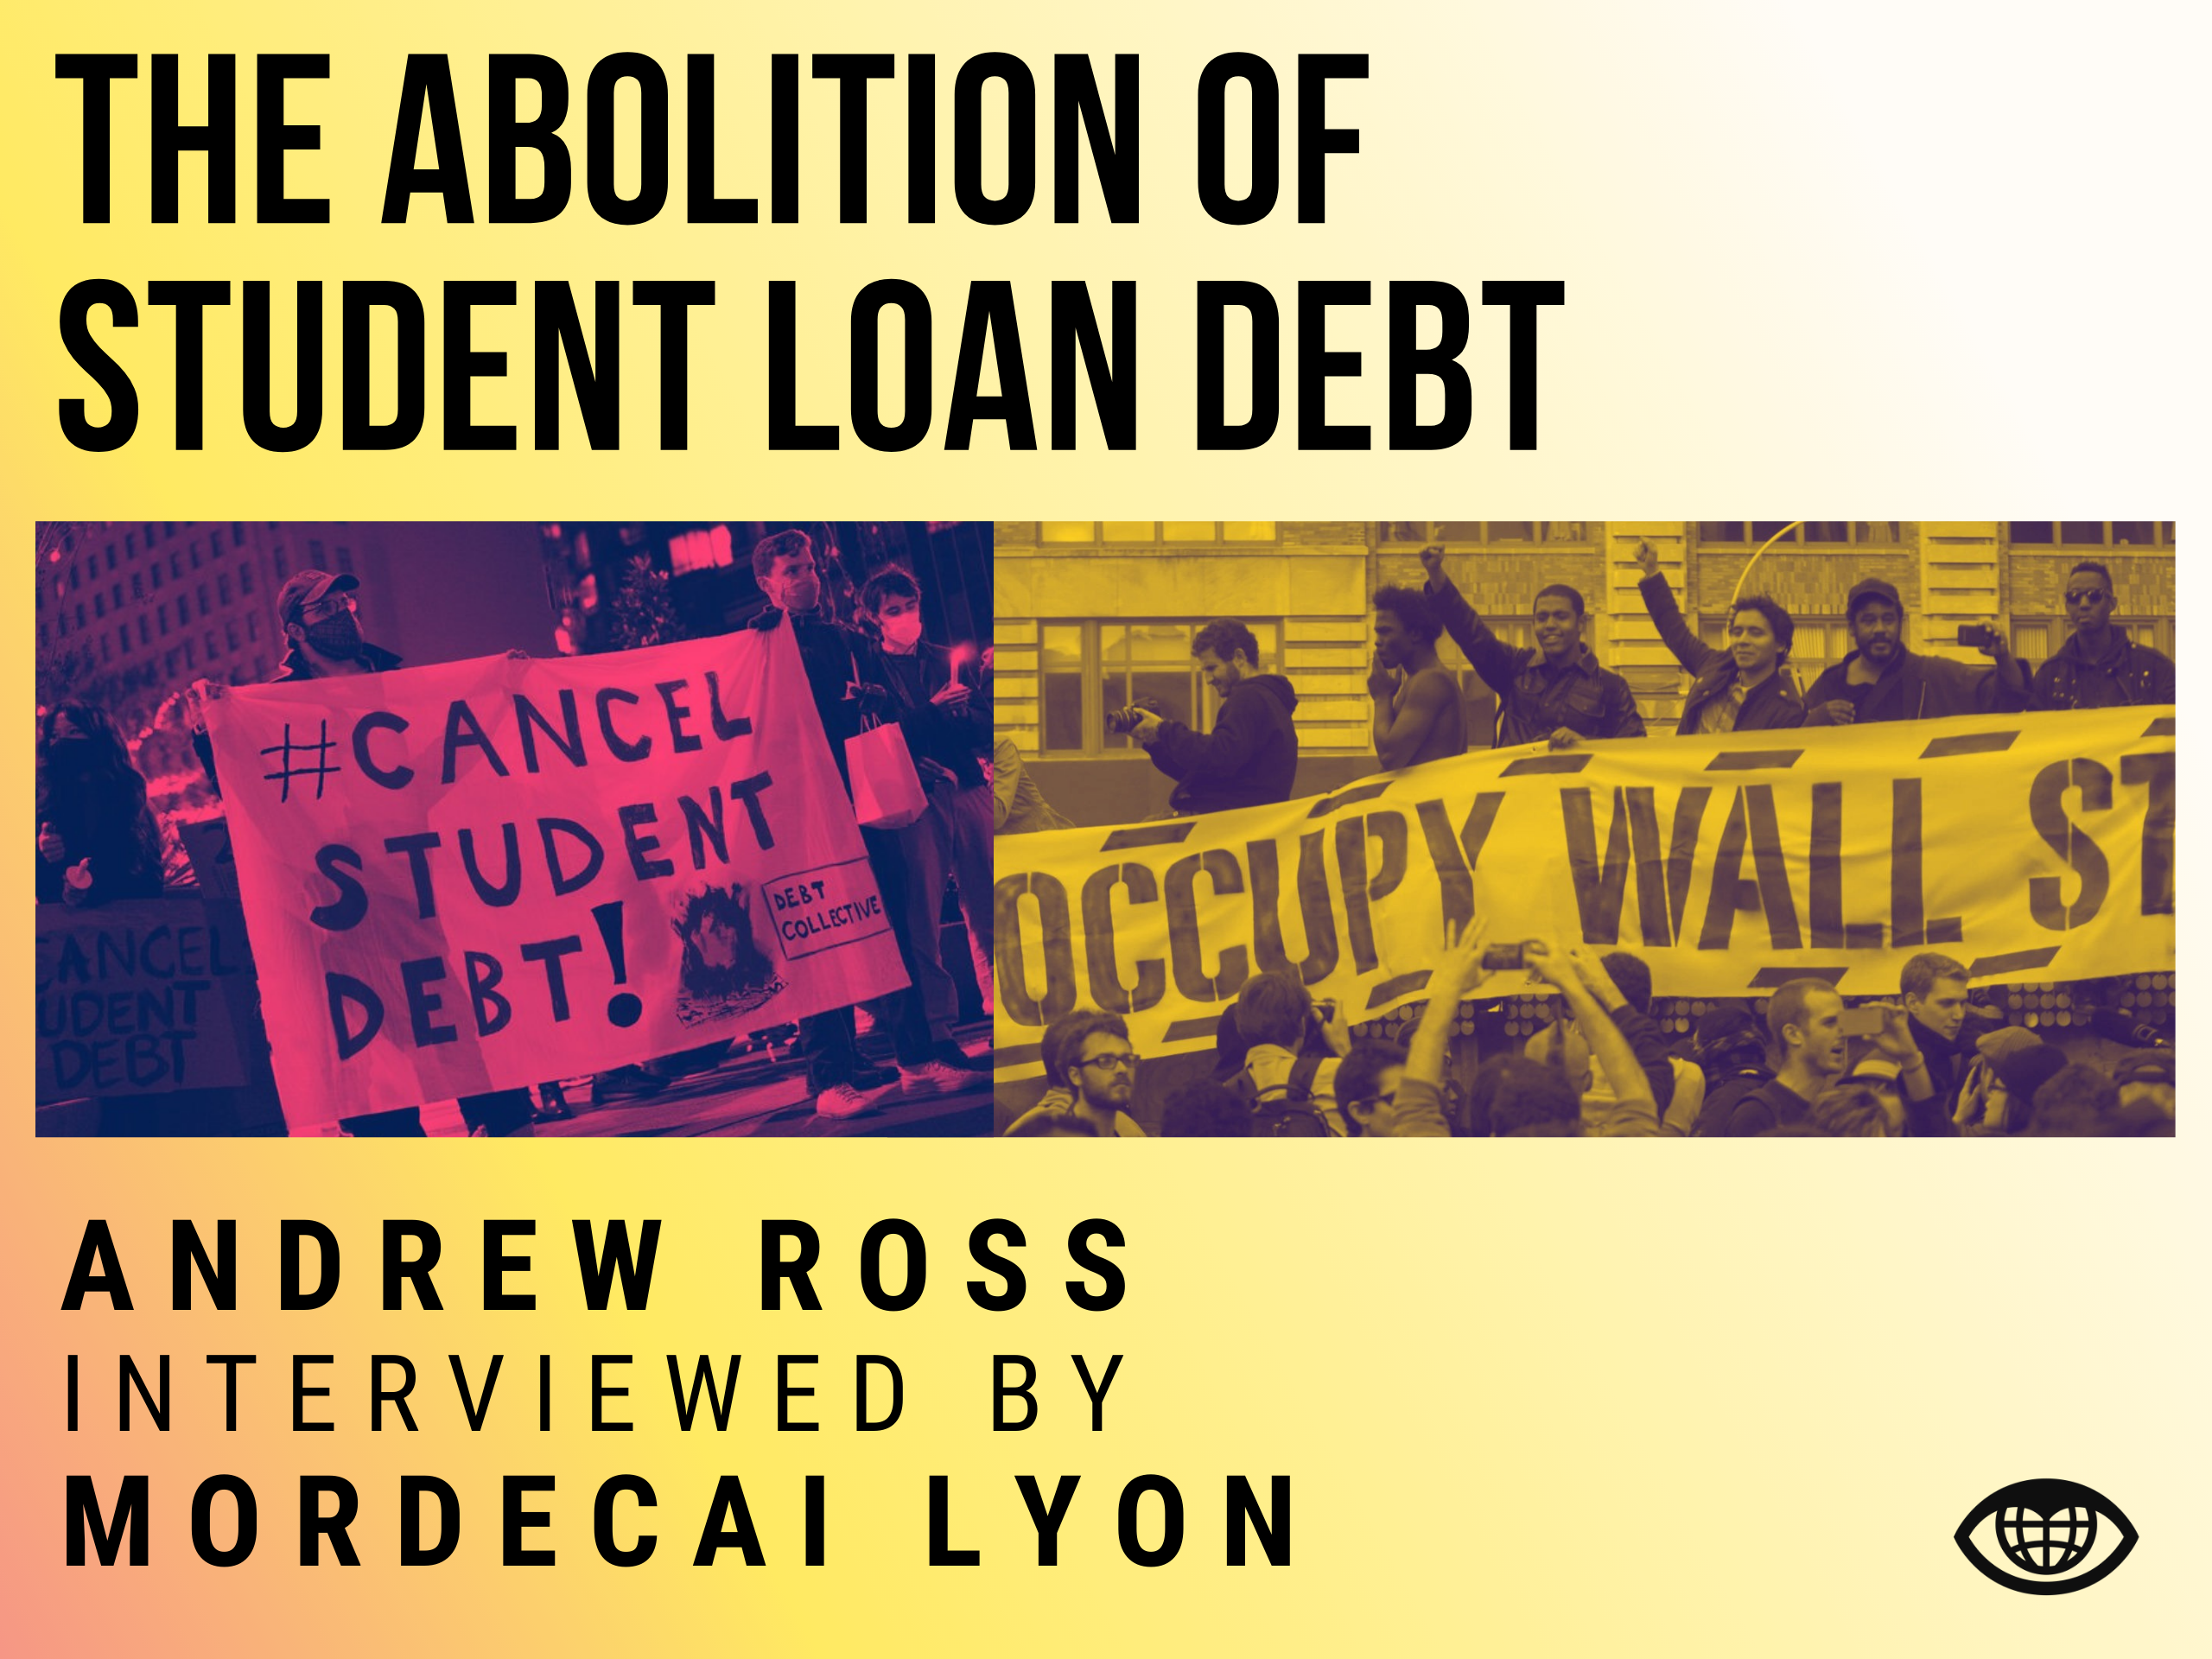 THE ABOLITION OF STUDENT LOAN DEBT